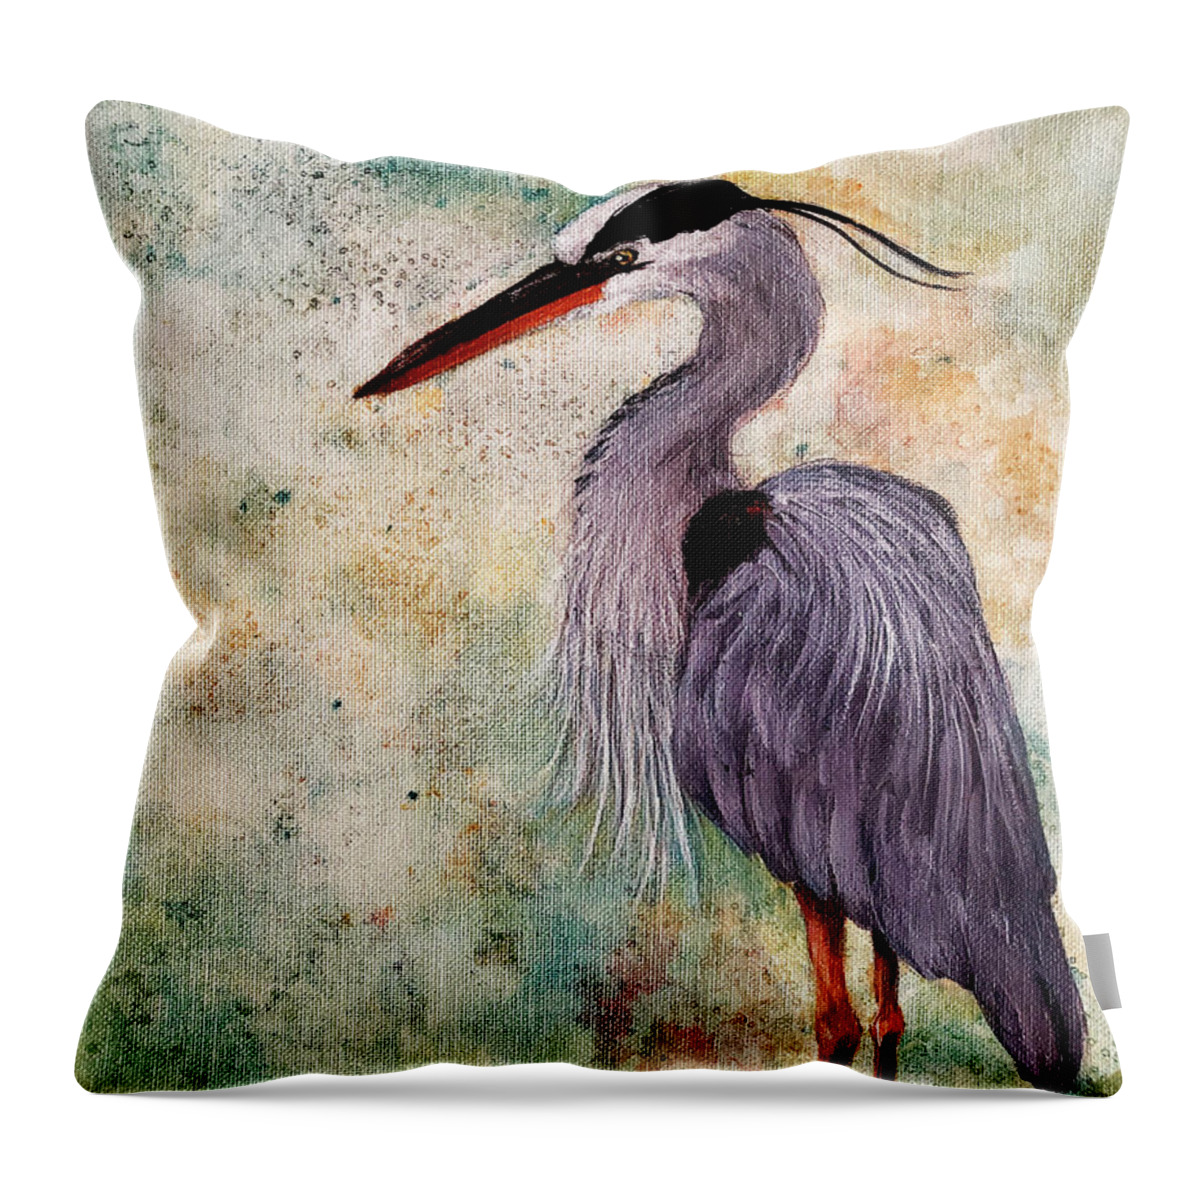 Wildlife Throw Pillow featuring the painting Great Blue Heron by Zan Savage